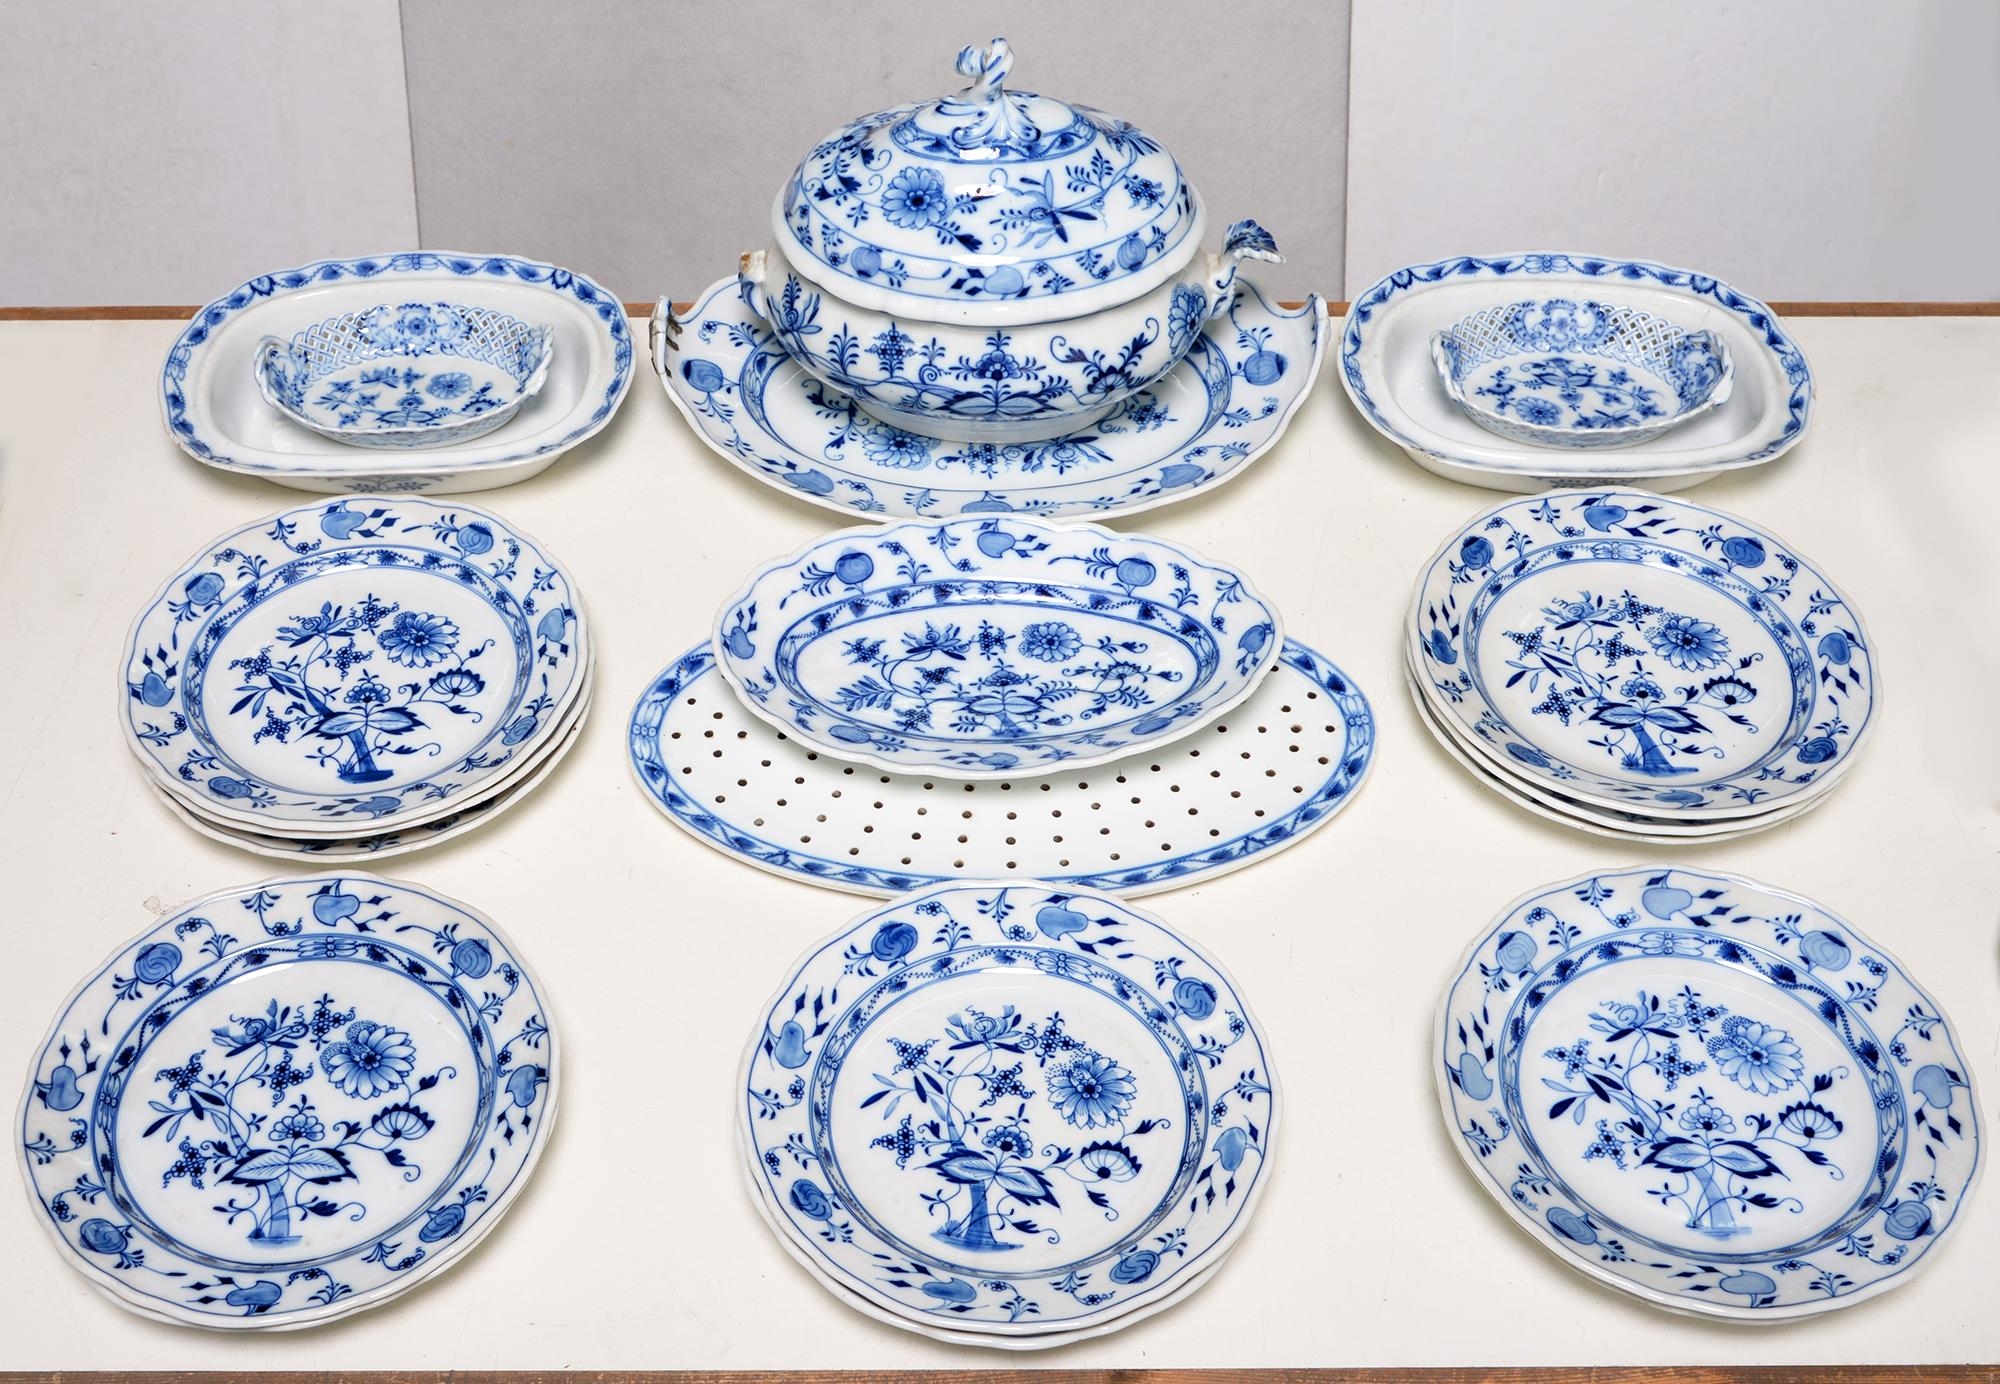 A Bloch & Co Eickwald blue and white dinner service, late 19th c, decorated in the Meissen Onion